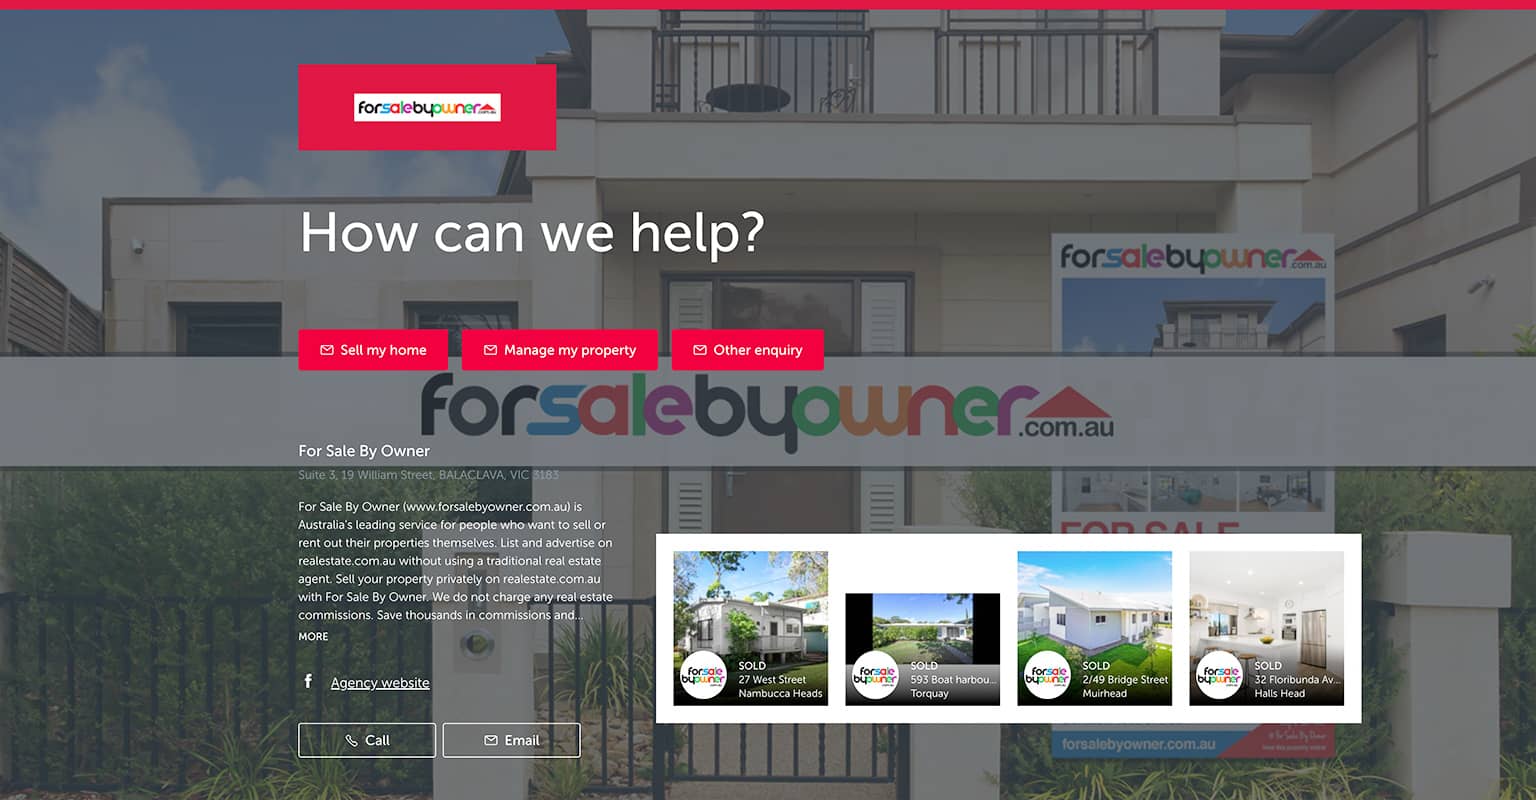 How Much Does It Cost To Advertise On Realestate.com.au?